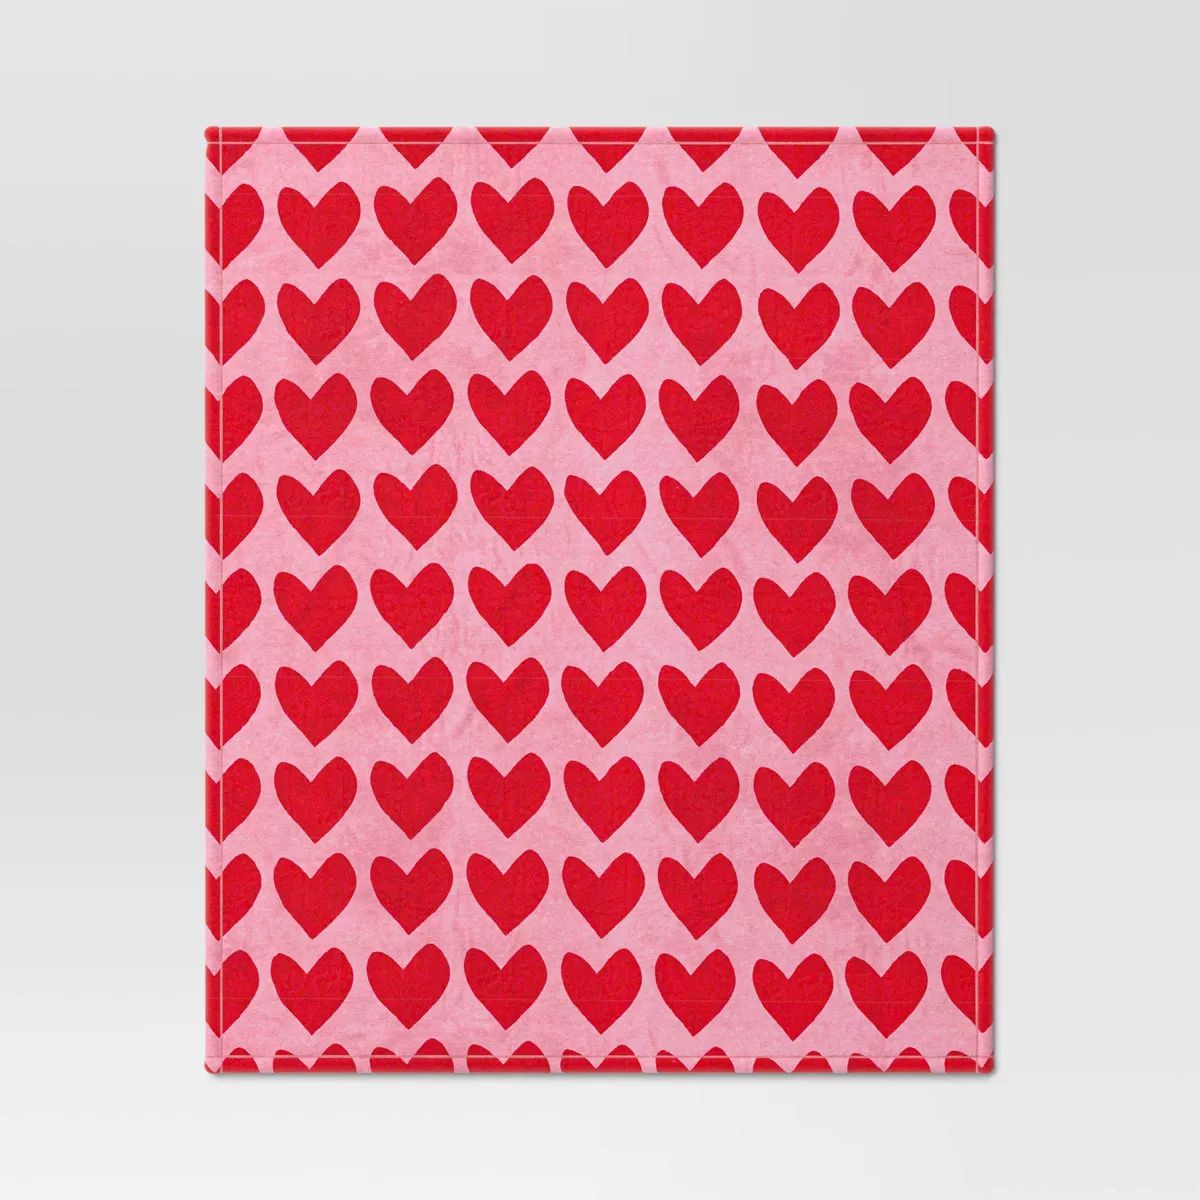 Heart Printed Plush Valentine's Day Throw Blanket Pink/Red - Room Essentials™ | Target